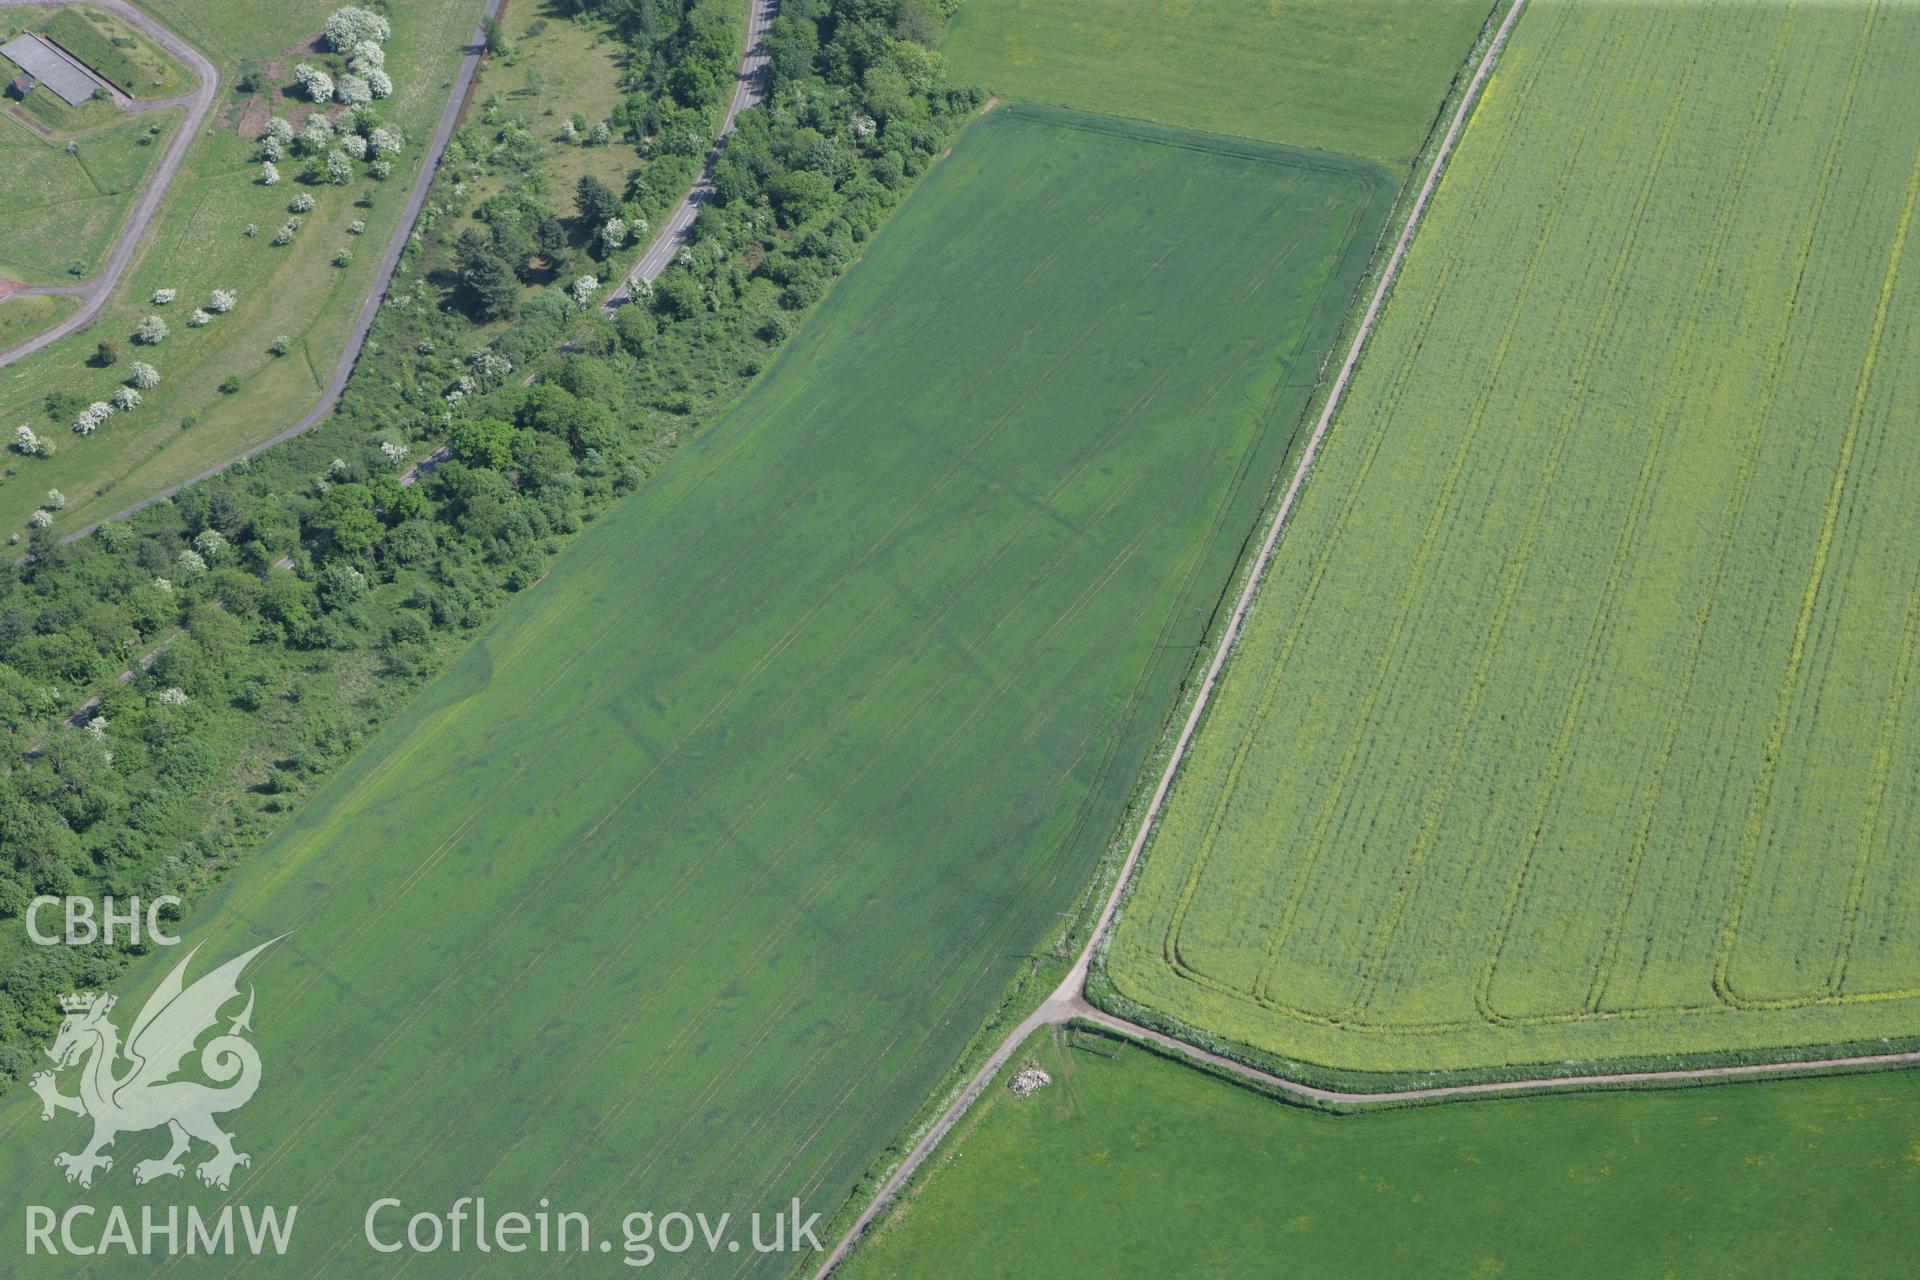 RCAHMW colour oblique photograph of Trewen Enclosure complex (ancient field system). Taken by Toby Driver on 24/05/2010.